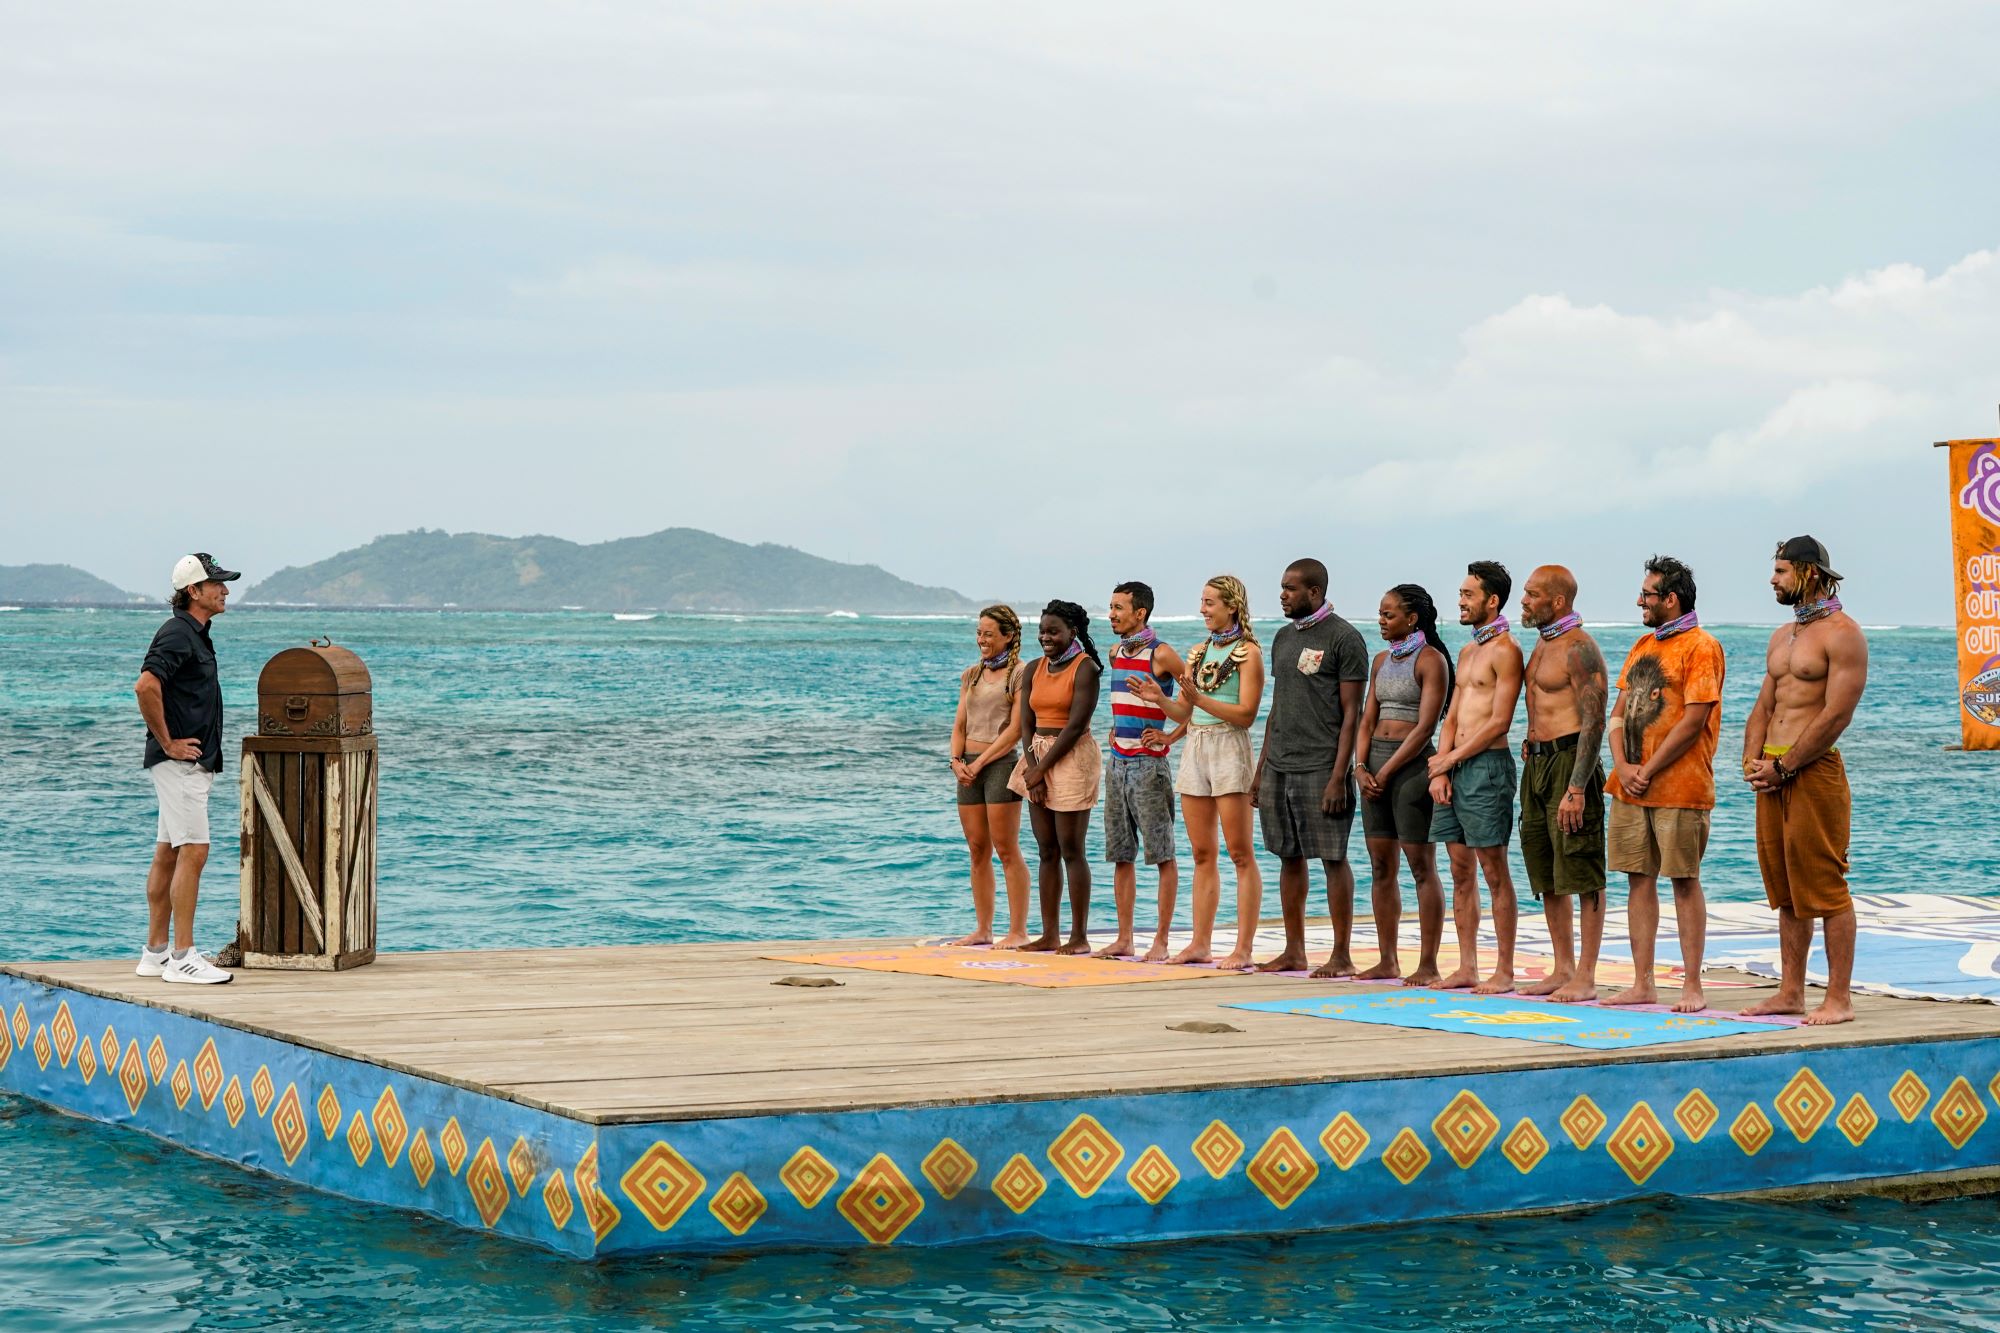 The 'Survivor' Season 42 cast gathers on a platform in the ocean while listening to Jeff Probst explain a challenge.